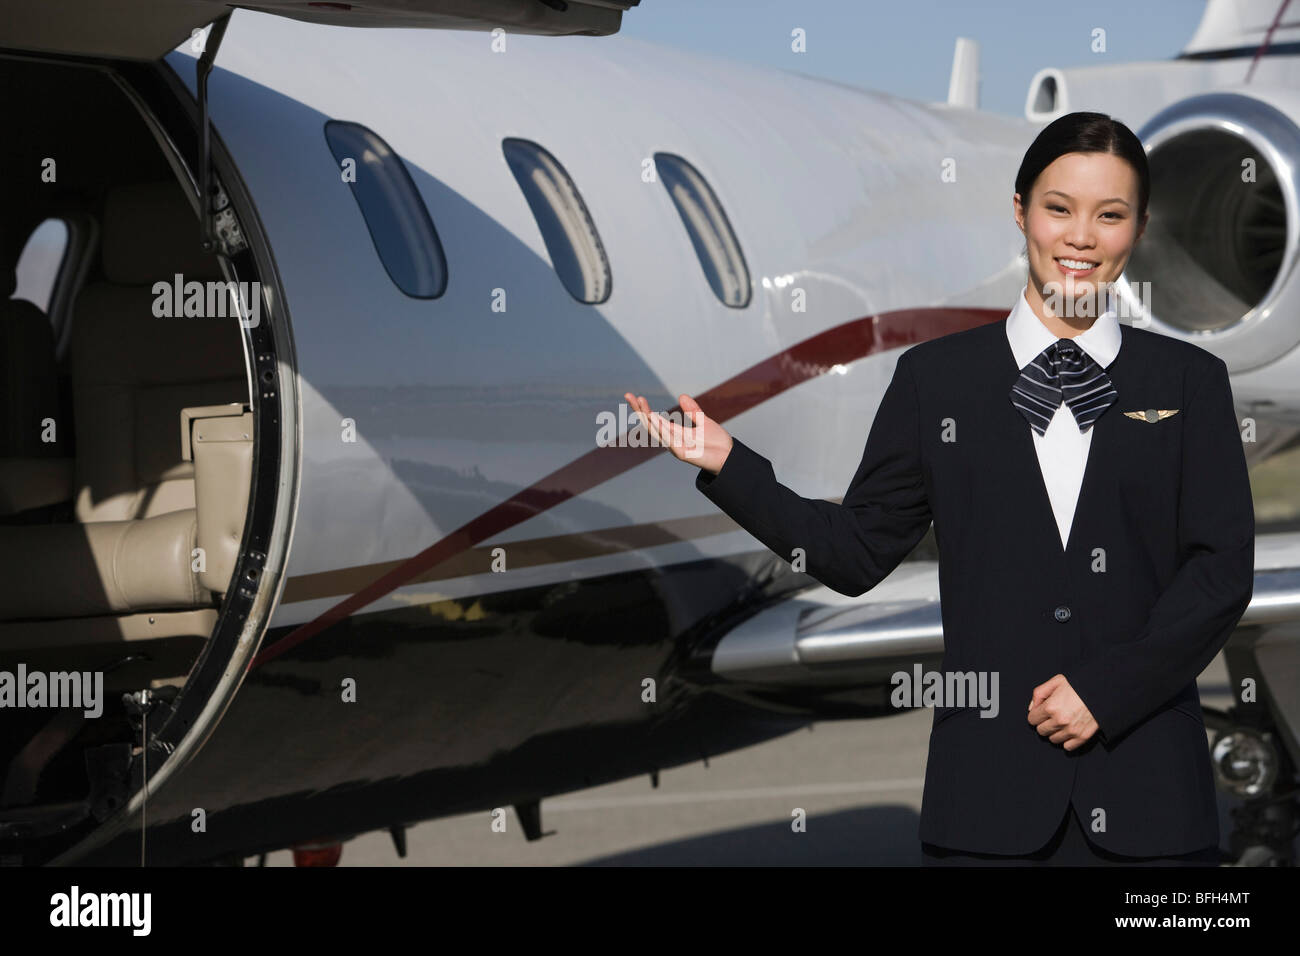 Female Asian mid-adult flight attendant in front of private jet. Stock Photo